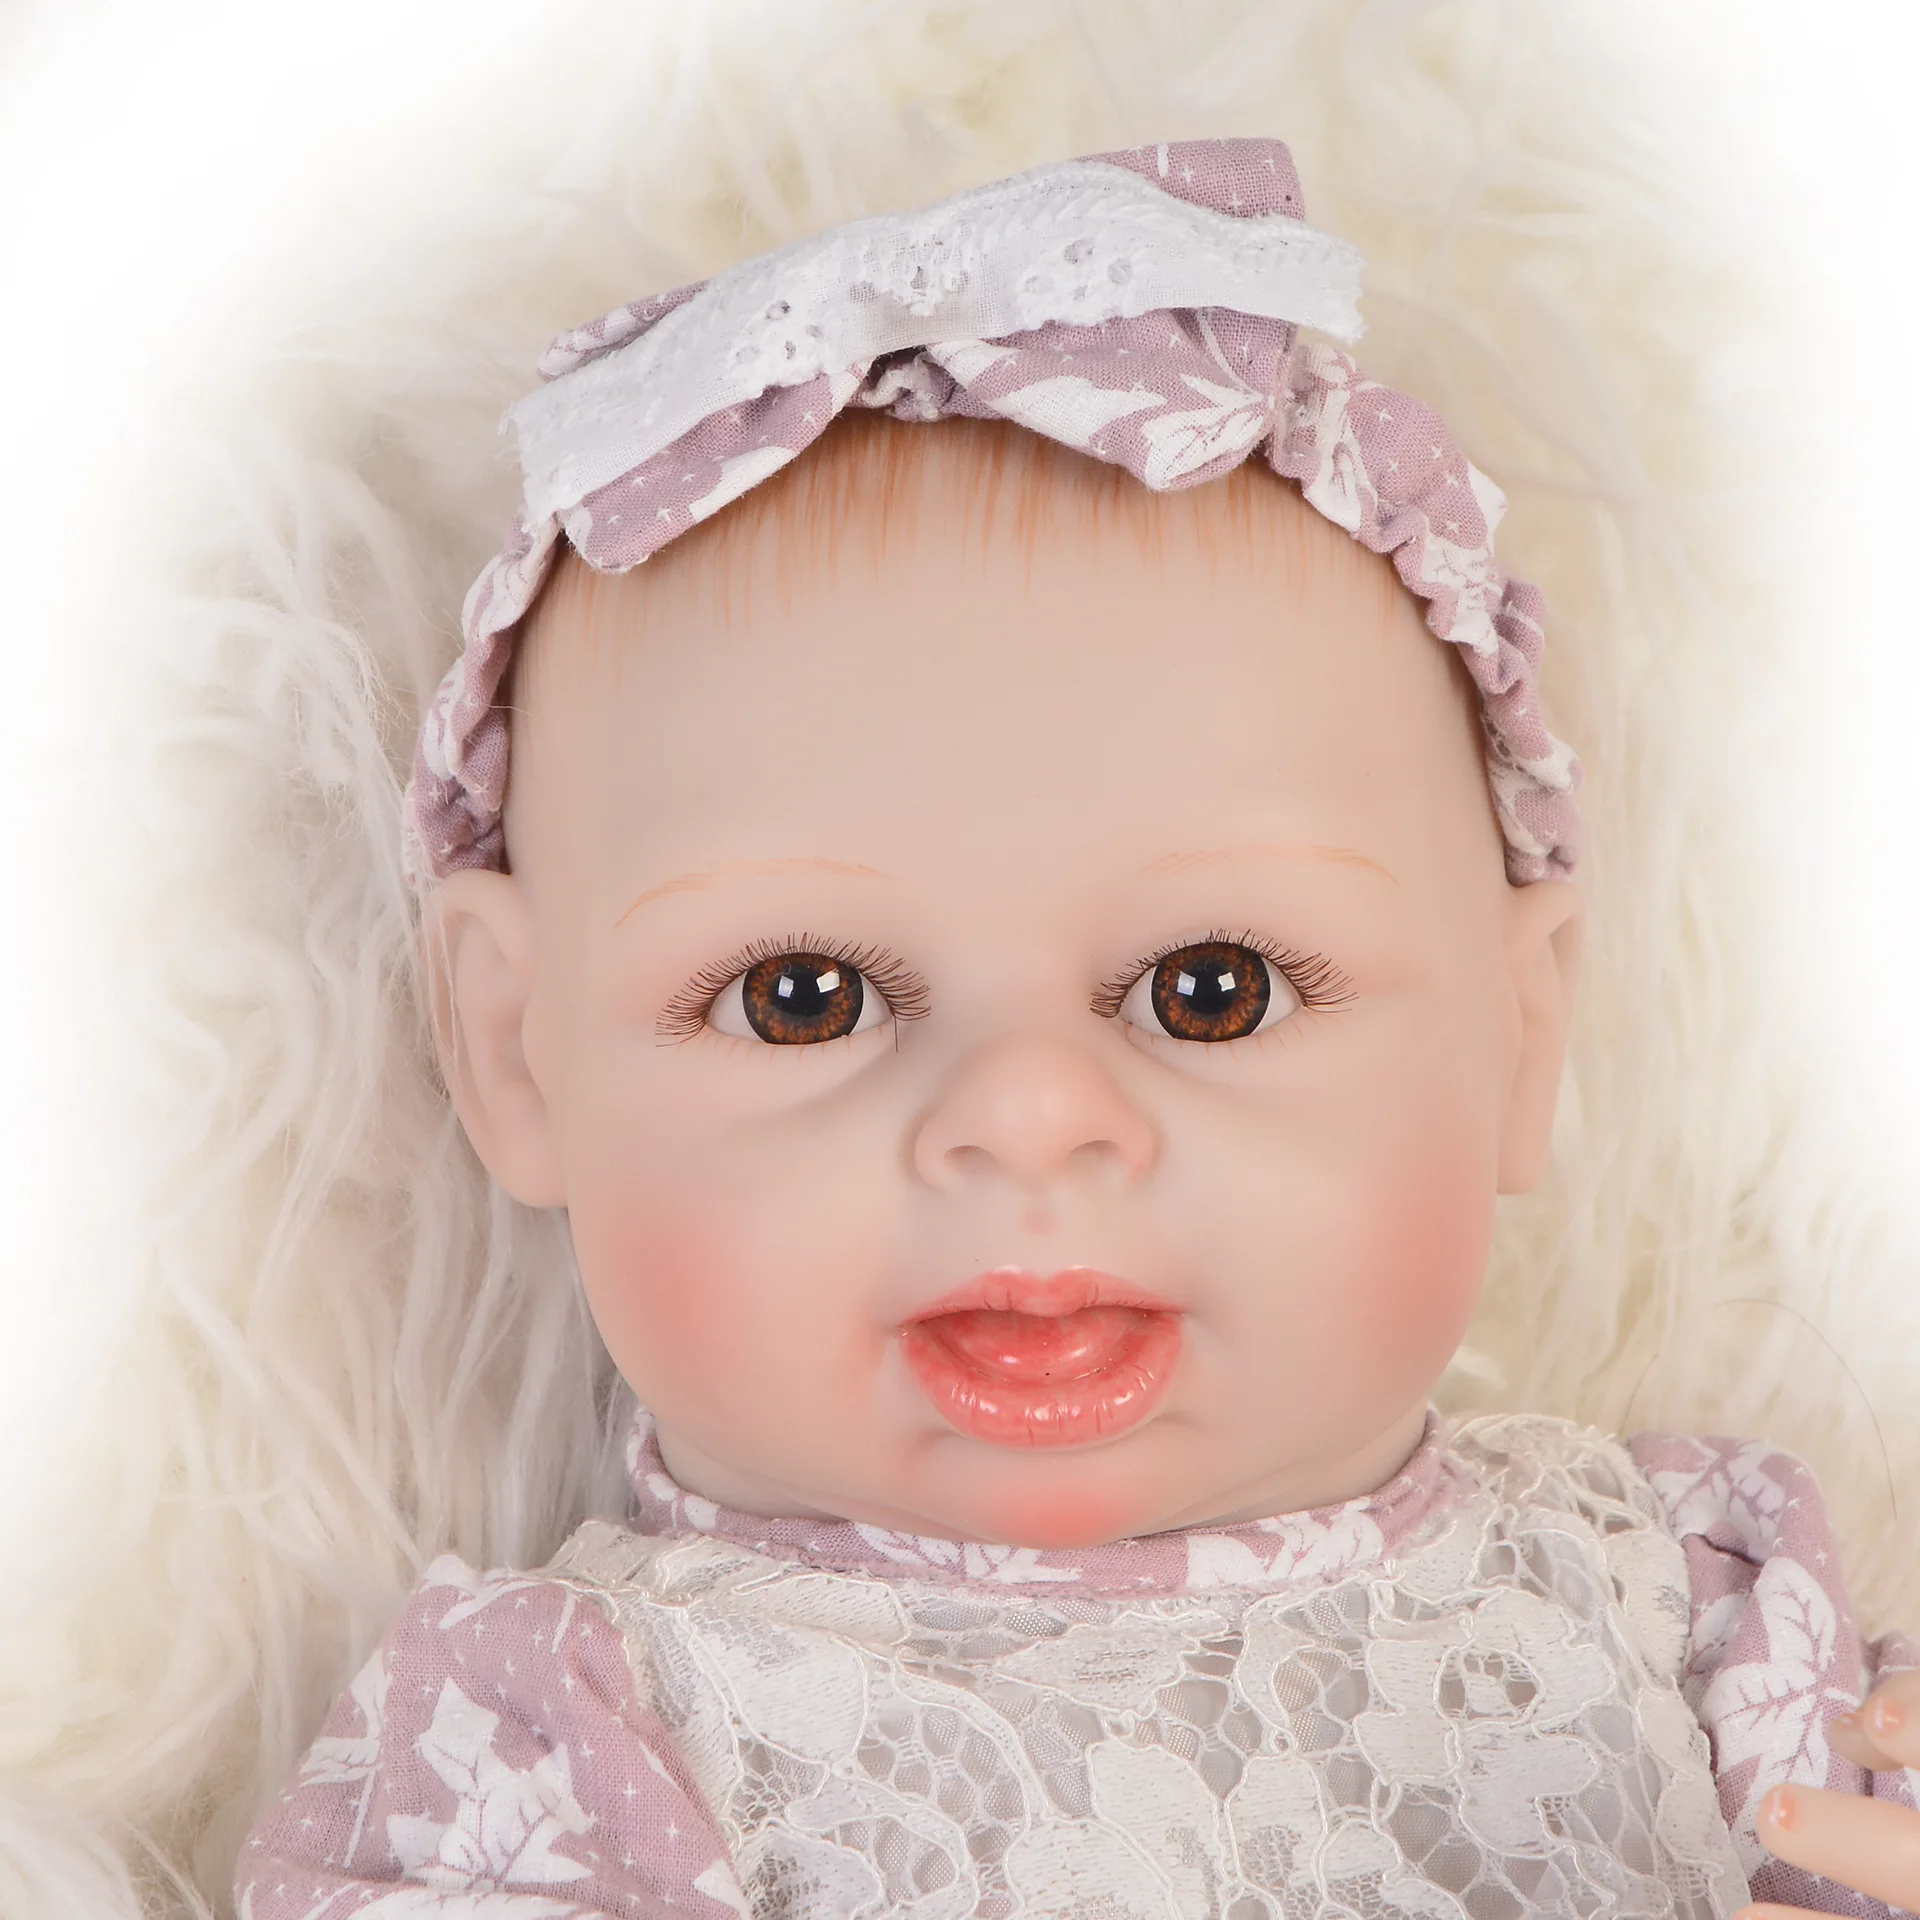  Keiumi 17-Inch New Style Full Rubber Reborn Baby Doll-Water Model Infant